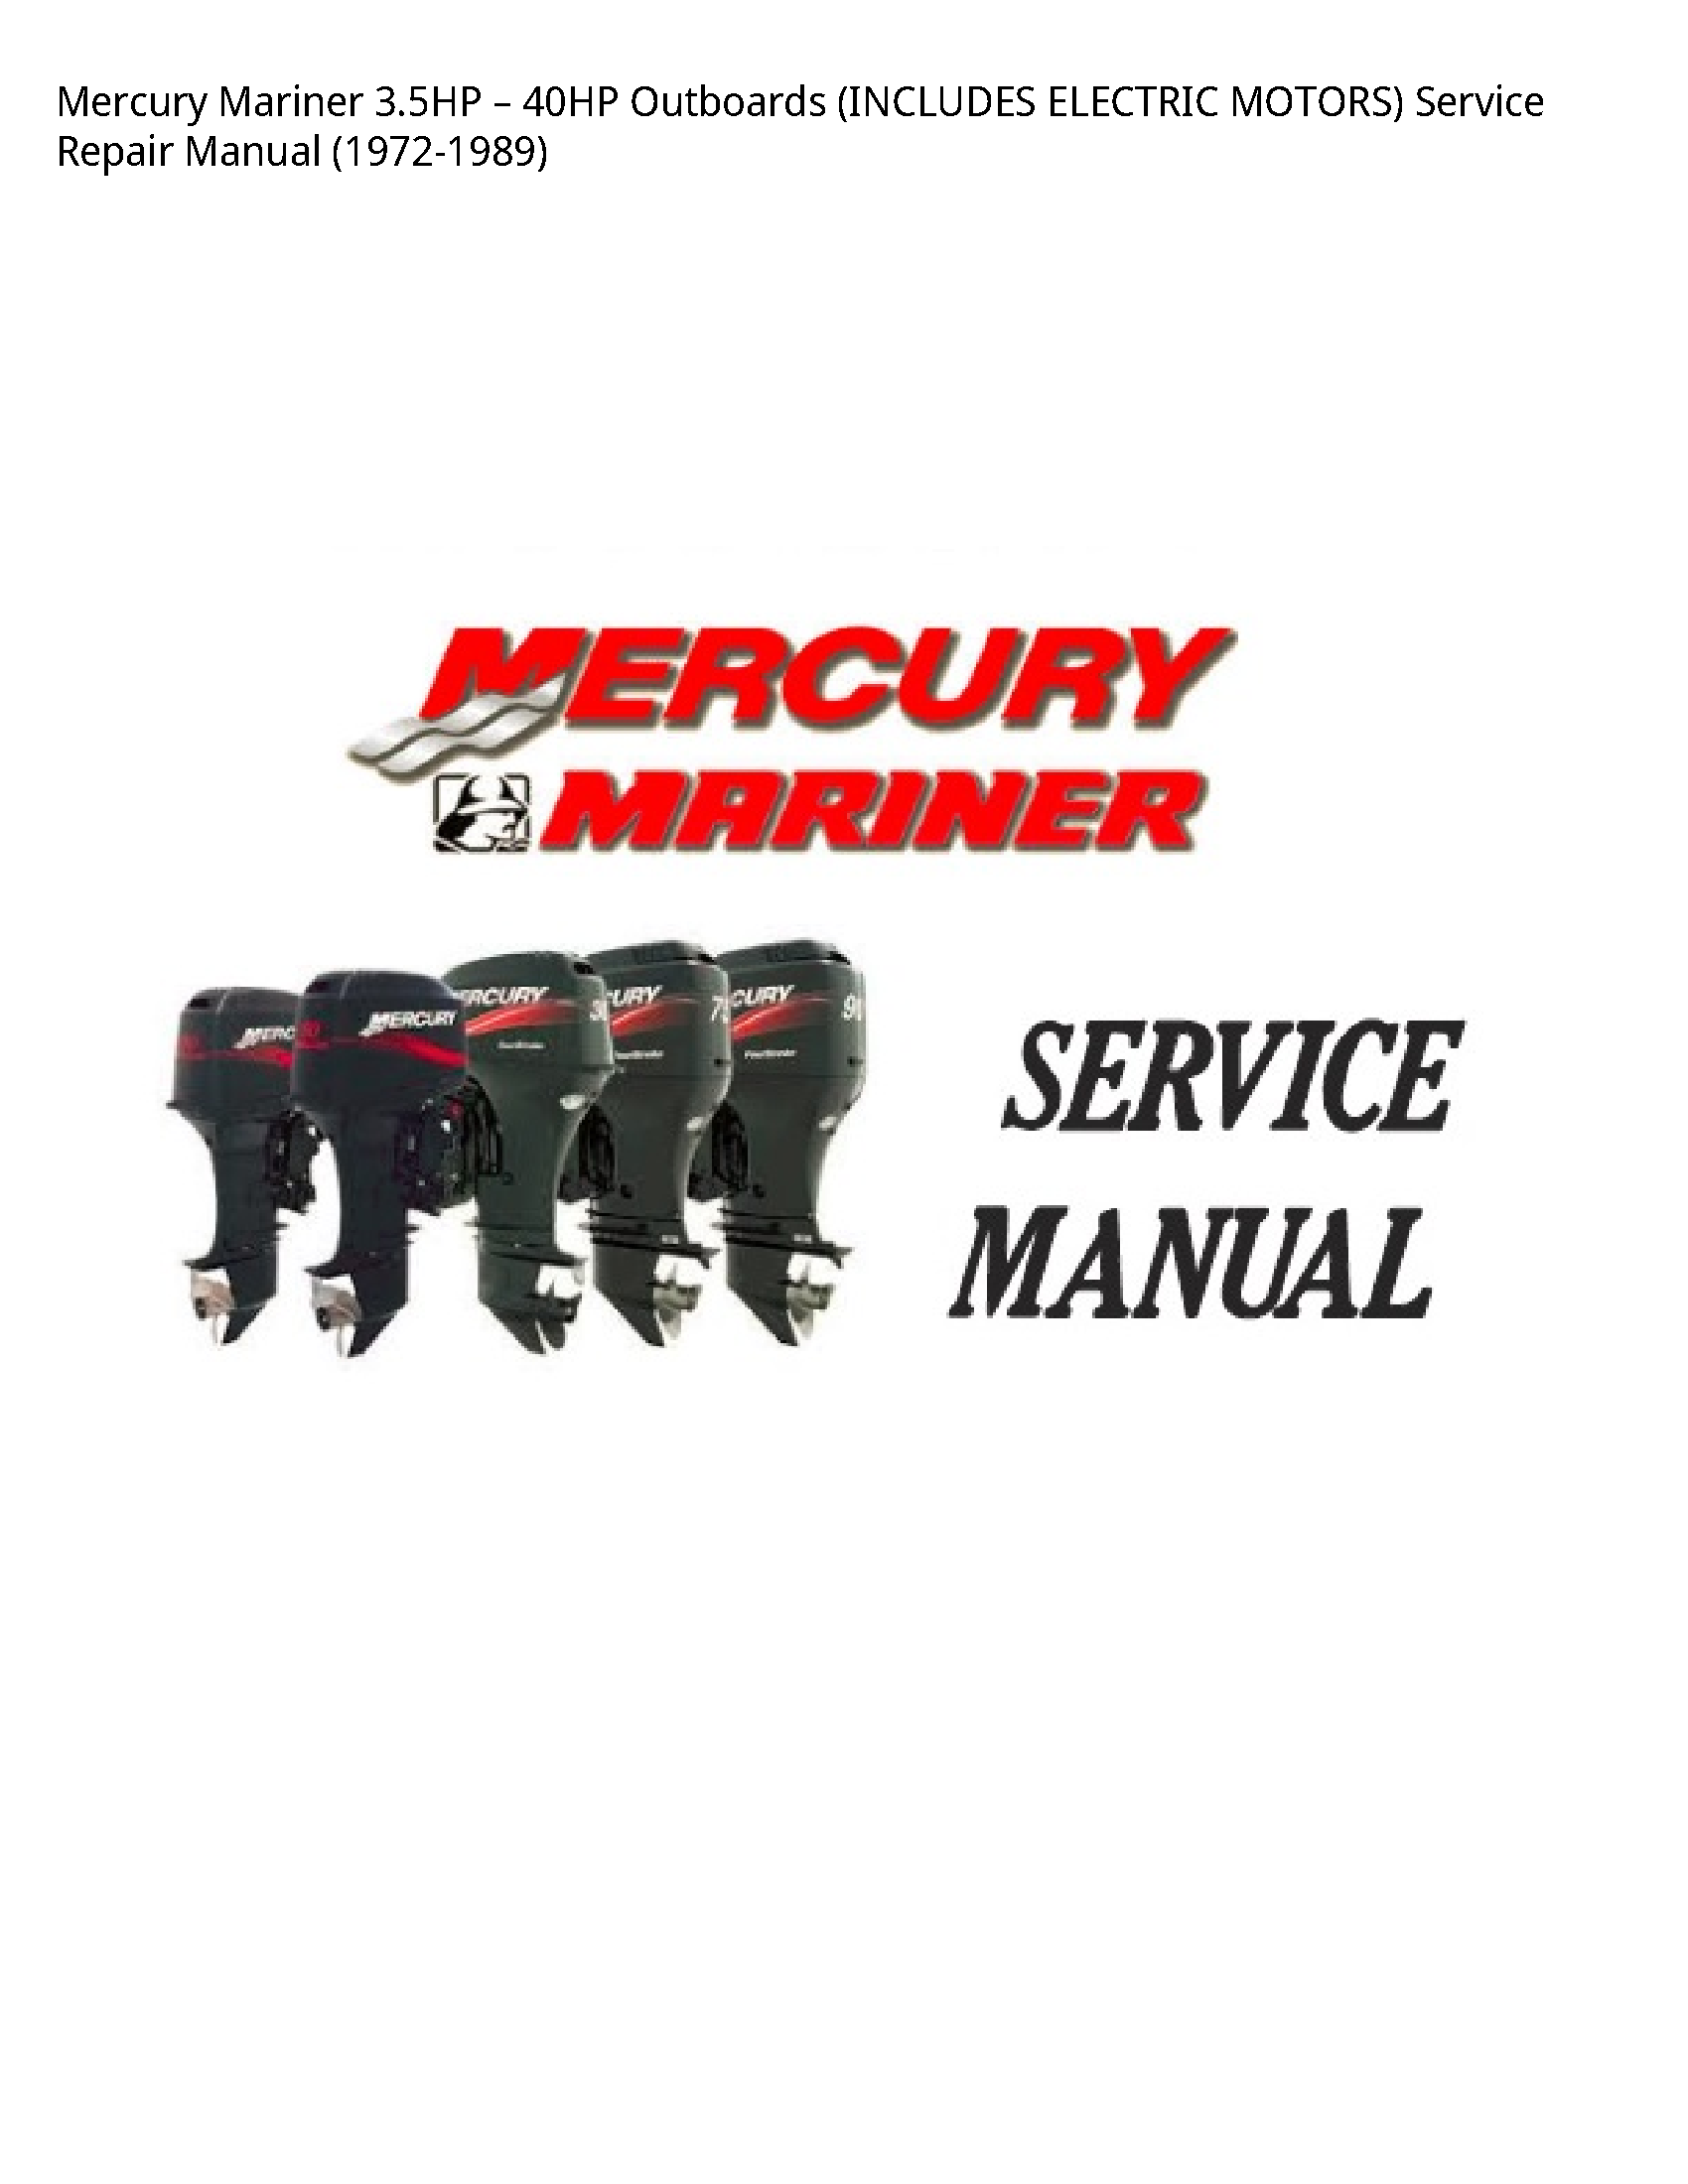 Mercury Mariner 3.5HP Outboards (INCLUDES ELECTRIC MOTORS) manual